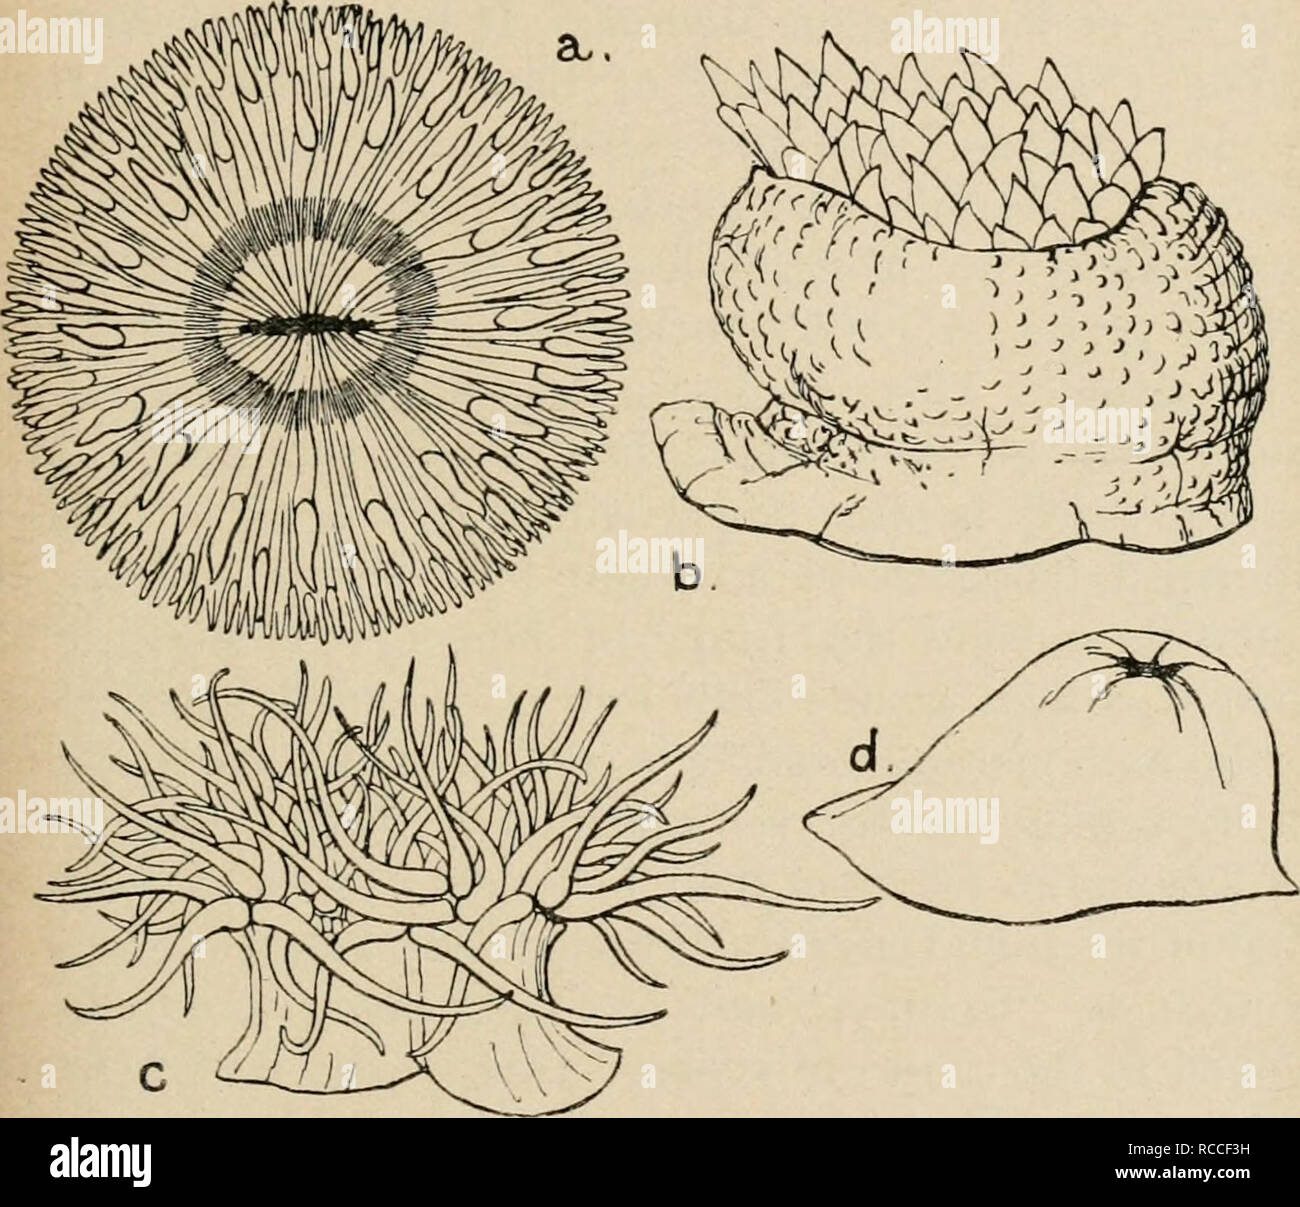 . Diversions of a naturalist. Natural history. SEA-WORMS AND SEA-ANEMONES 85. Fig. 6.—British Sea-Anemones. a, Sagartia bellis, the daisy anemone, viewed from above when fully expanded. b, Bunodes crassicornis, half expanded ; side view. c, Anthea cereus. The tentacles are pale apple-green in colour, tipped with mauve, and cannot be completely retracted. d, Actinia mesembryanthemum. The disk of tentacles is completely retracted. This is the commonest sea-anemone on our South Coast, and is usually maroon colour, but often is spotted like a strawberry.. Please note that these images are extracte Stock Photo